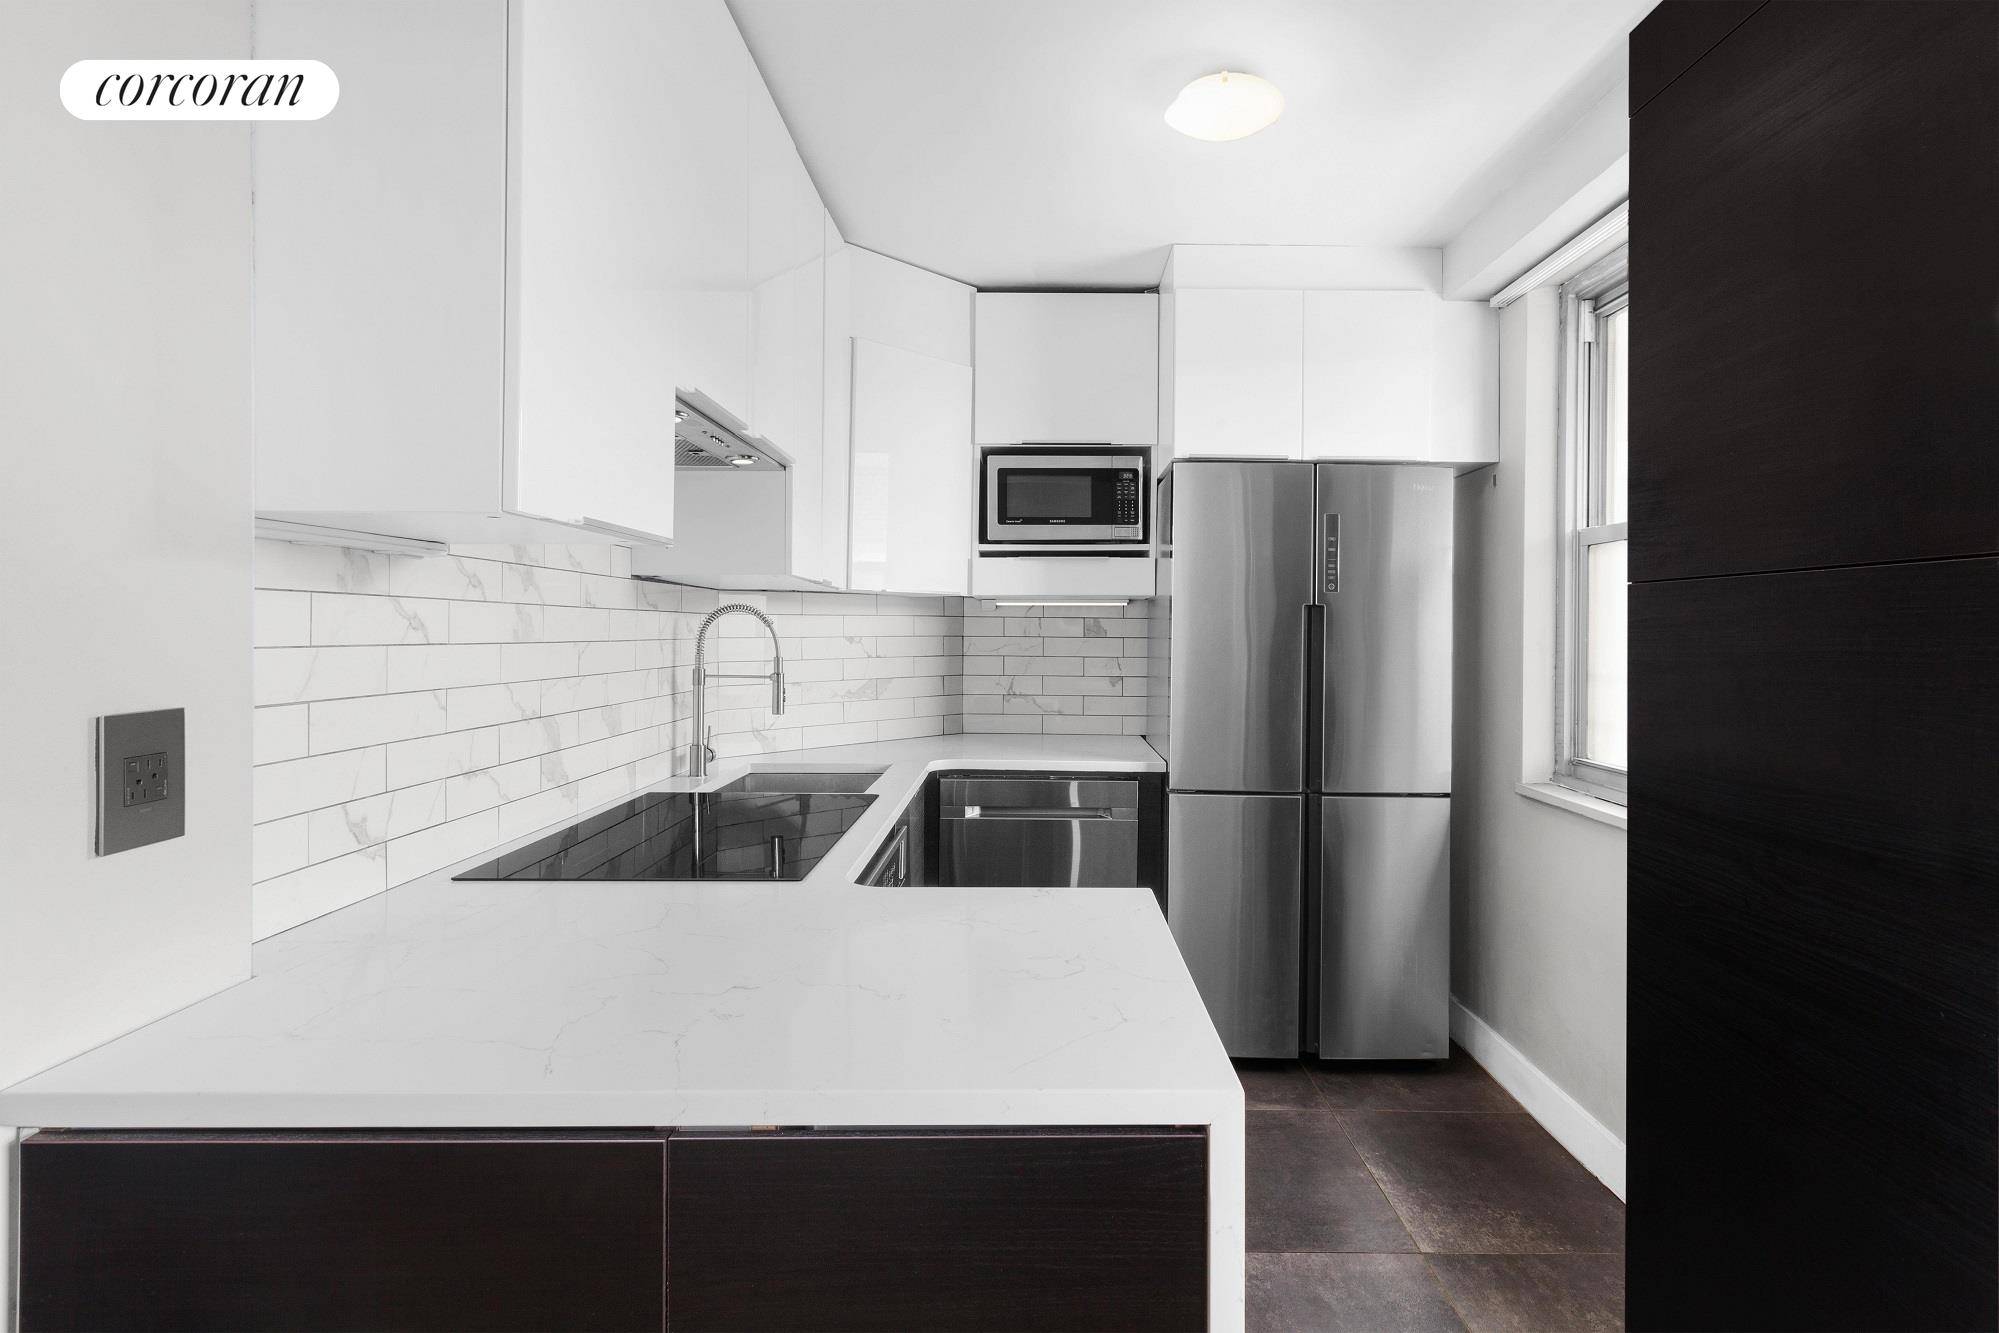 Located at 61 15 97th Street, part of the Park Plaza Cooperative, this gut renovated one bedroom one bathroom home offers a generously proportioned footprint that provides a myriad of ...